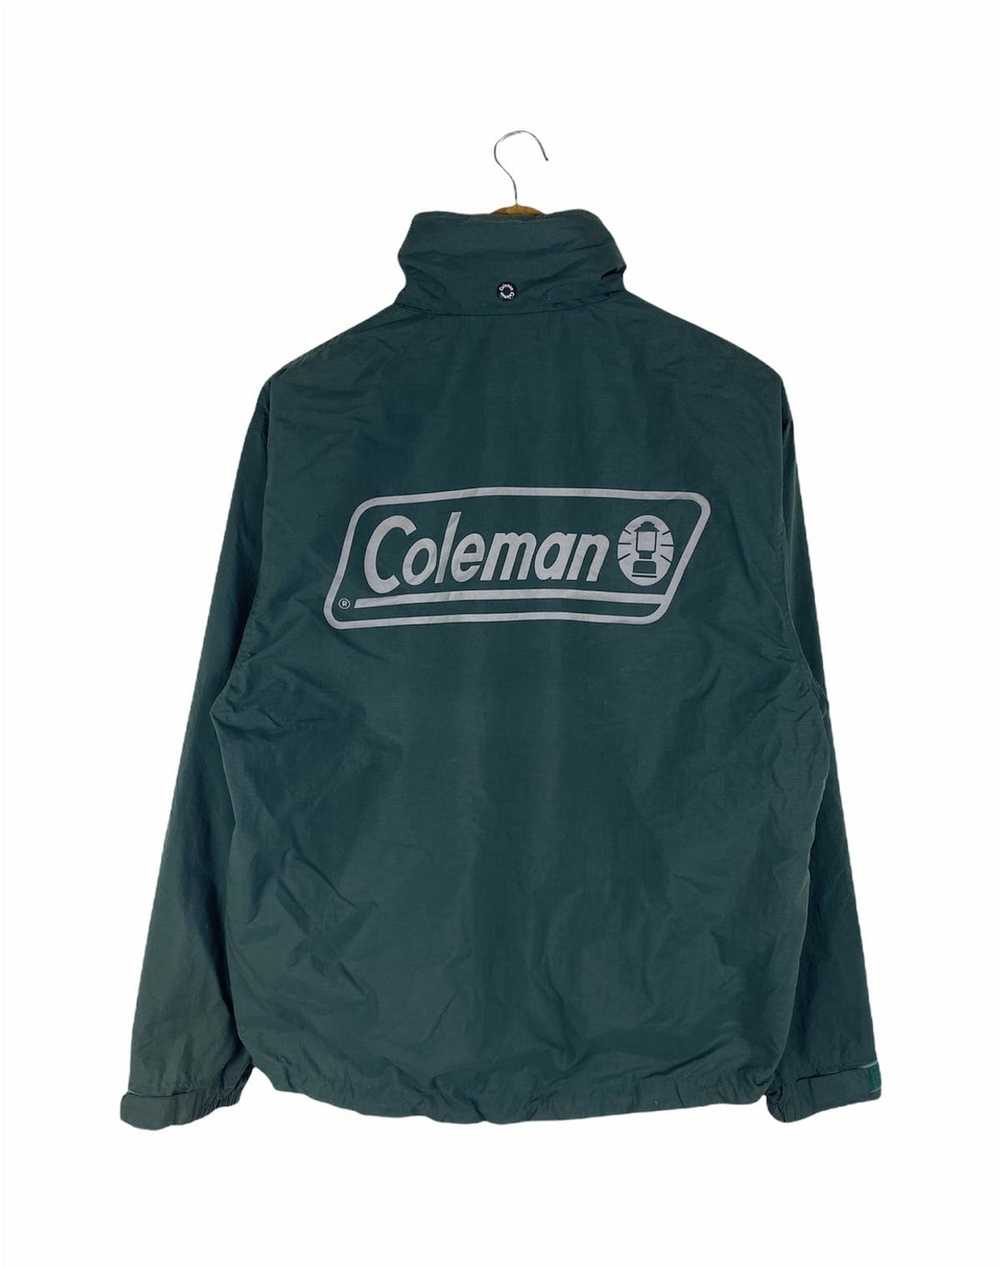 Coleman × Outdoor Life × Streetwear 🔥DHL SHIPPIN… - image 1